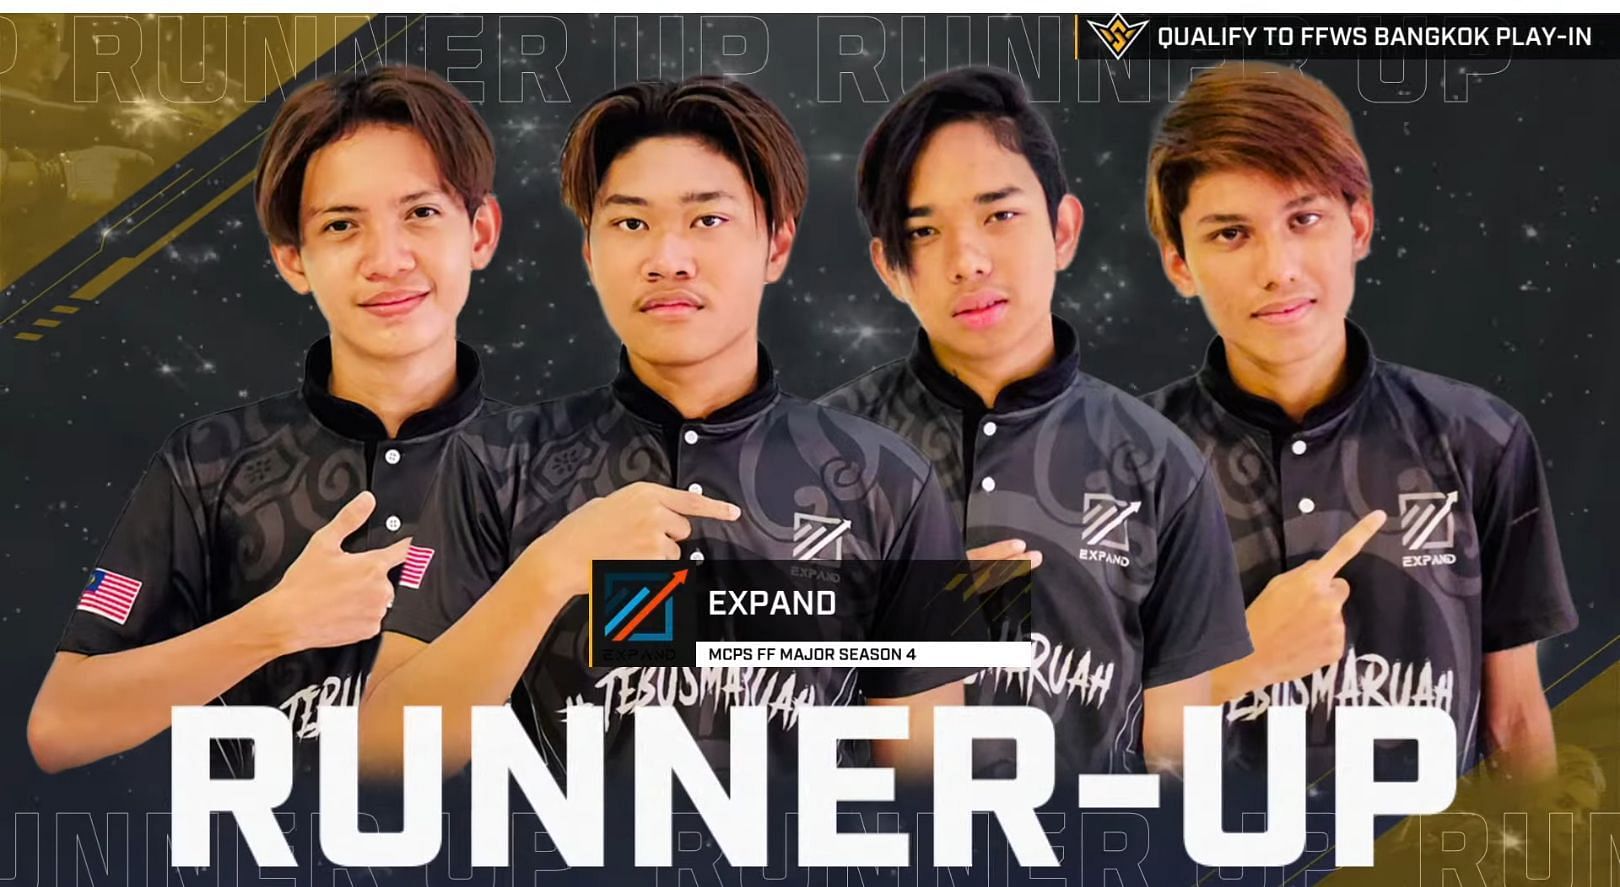 Expand claimed second place in MCPS Season 4 (Image via Garena)